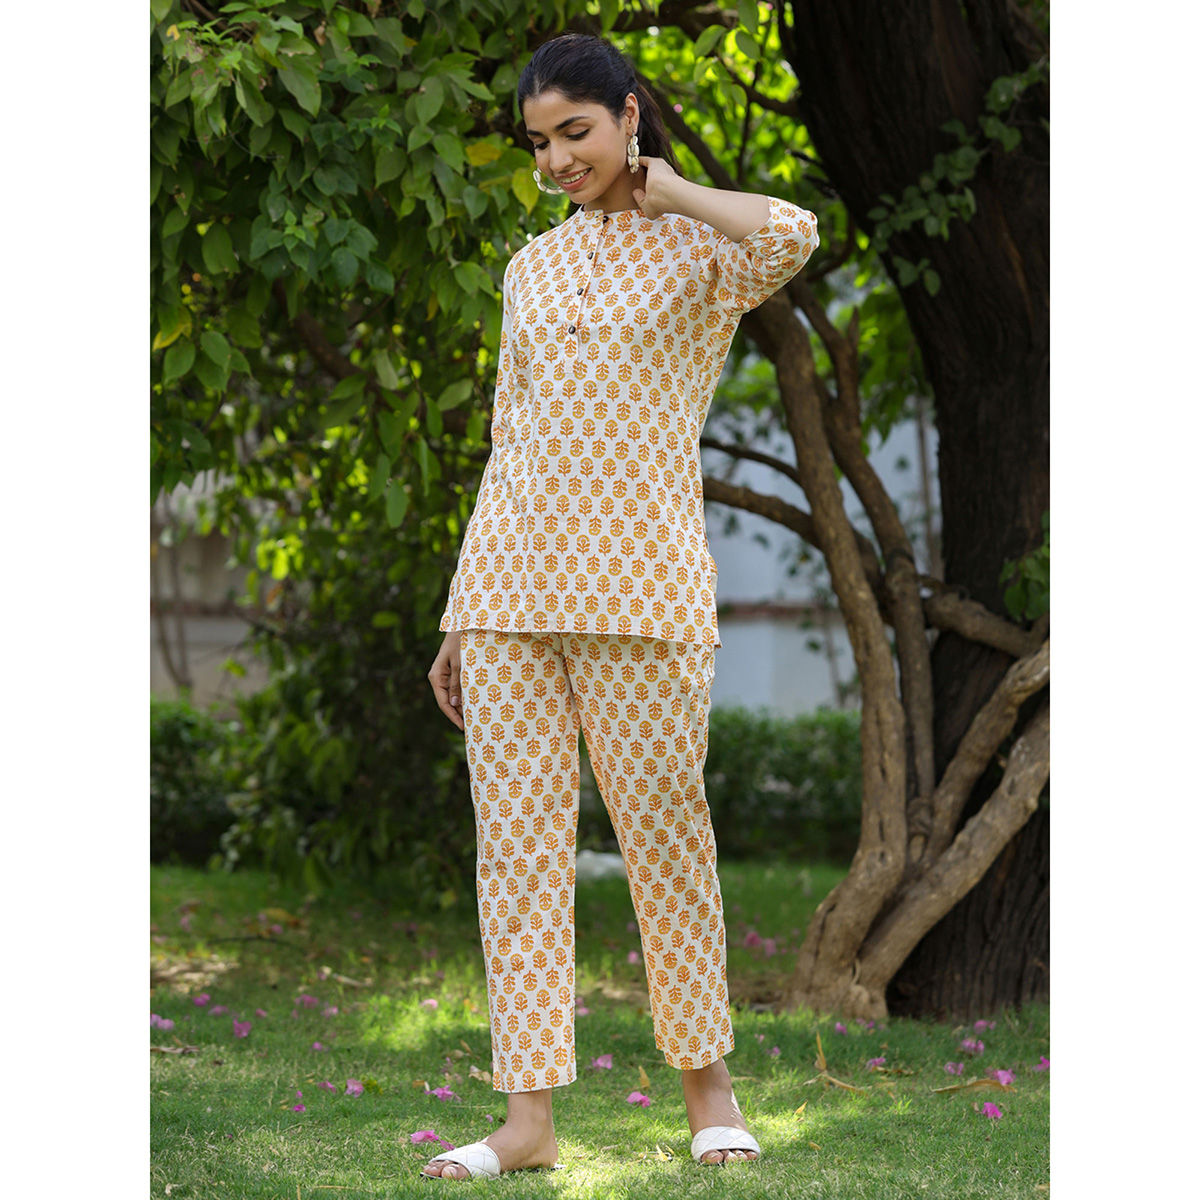 Buy Comfortable White Cotton Night Suits For Women Online In India At  Discounted Prices